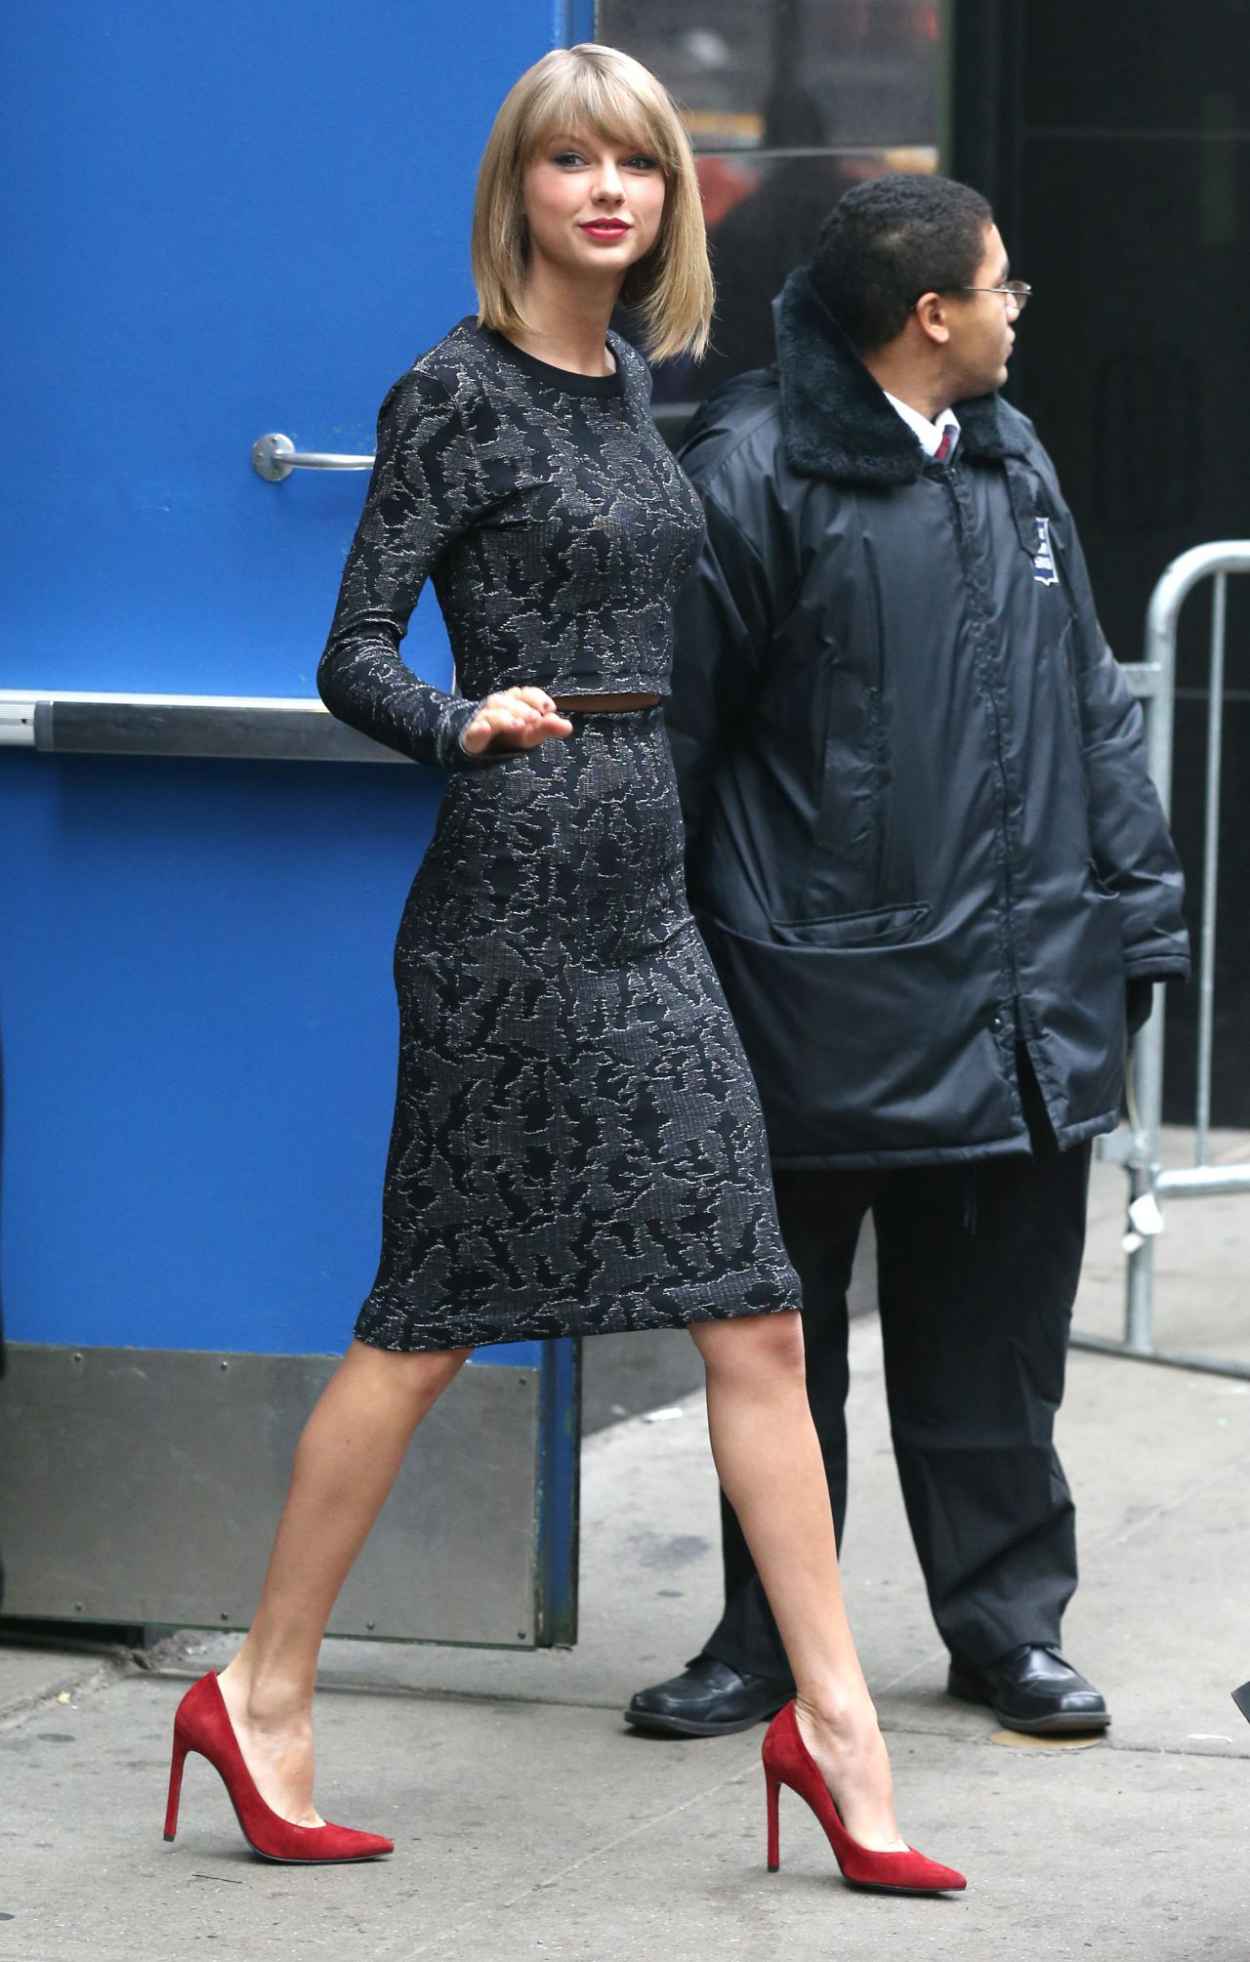 Taylor Swift Arriving to Appear at Good Morning America in New York